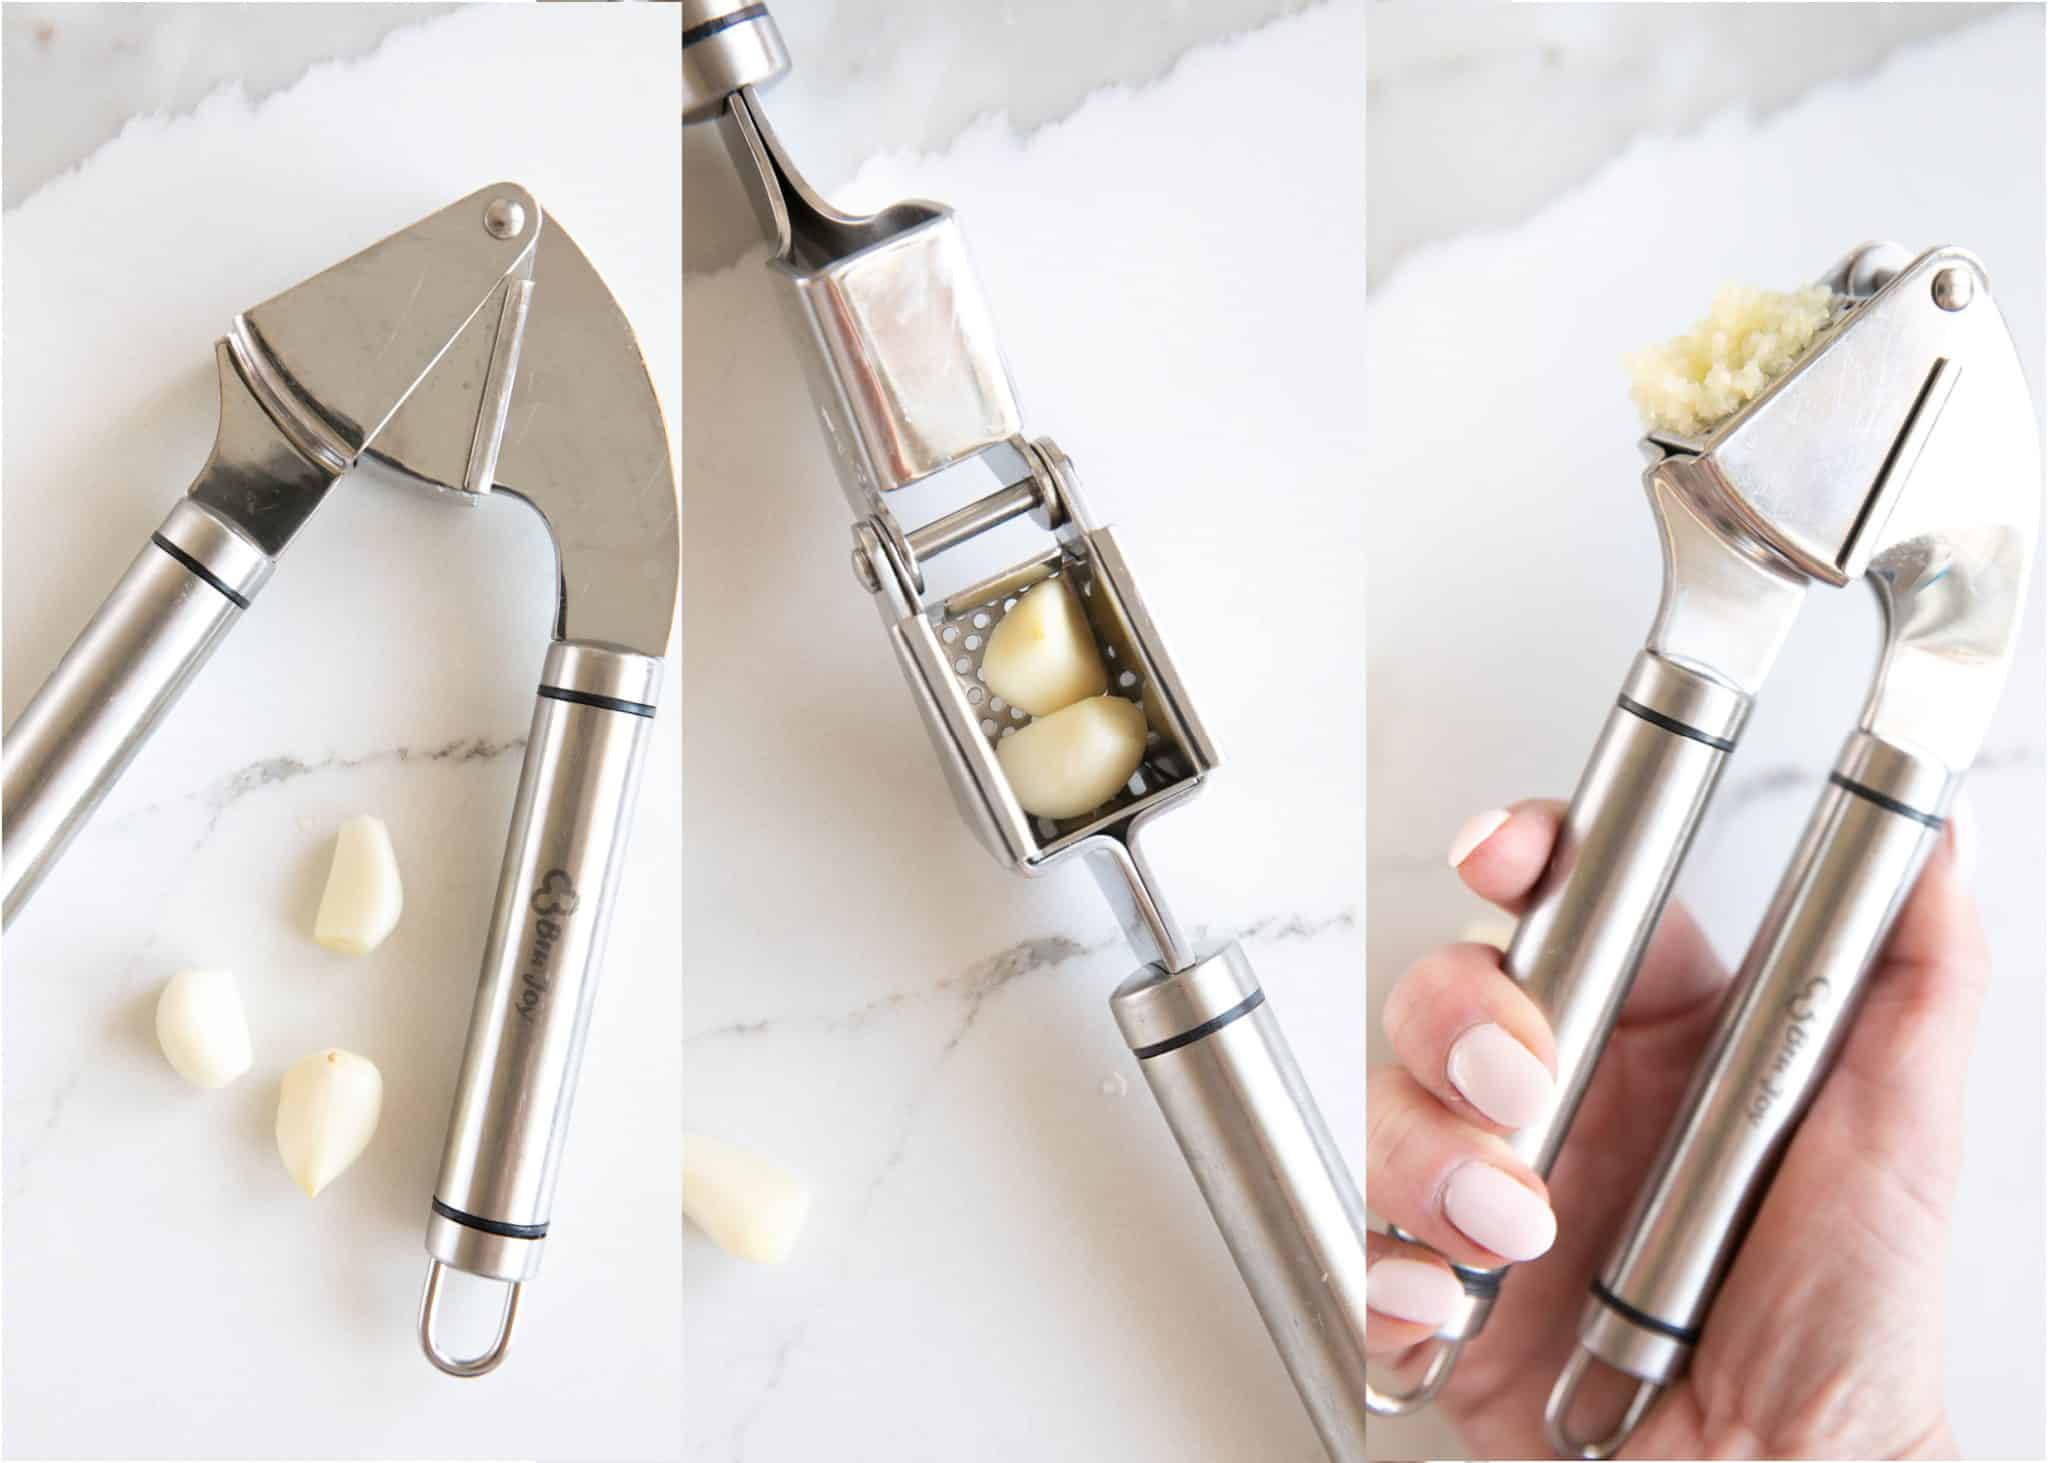 Collage of three images showing the steps to use a garlic press.